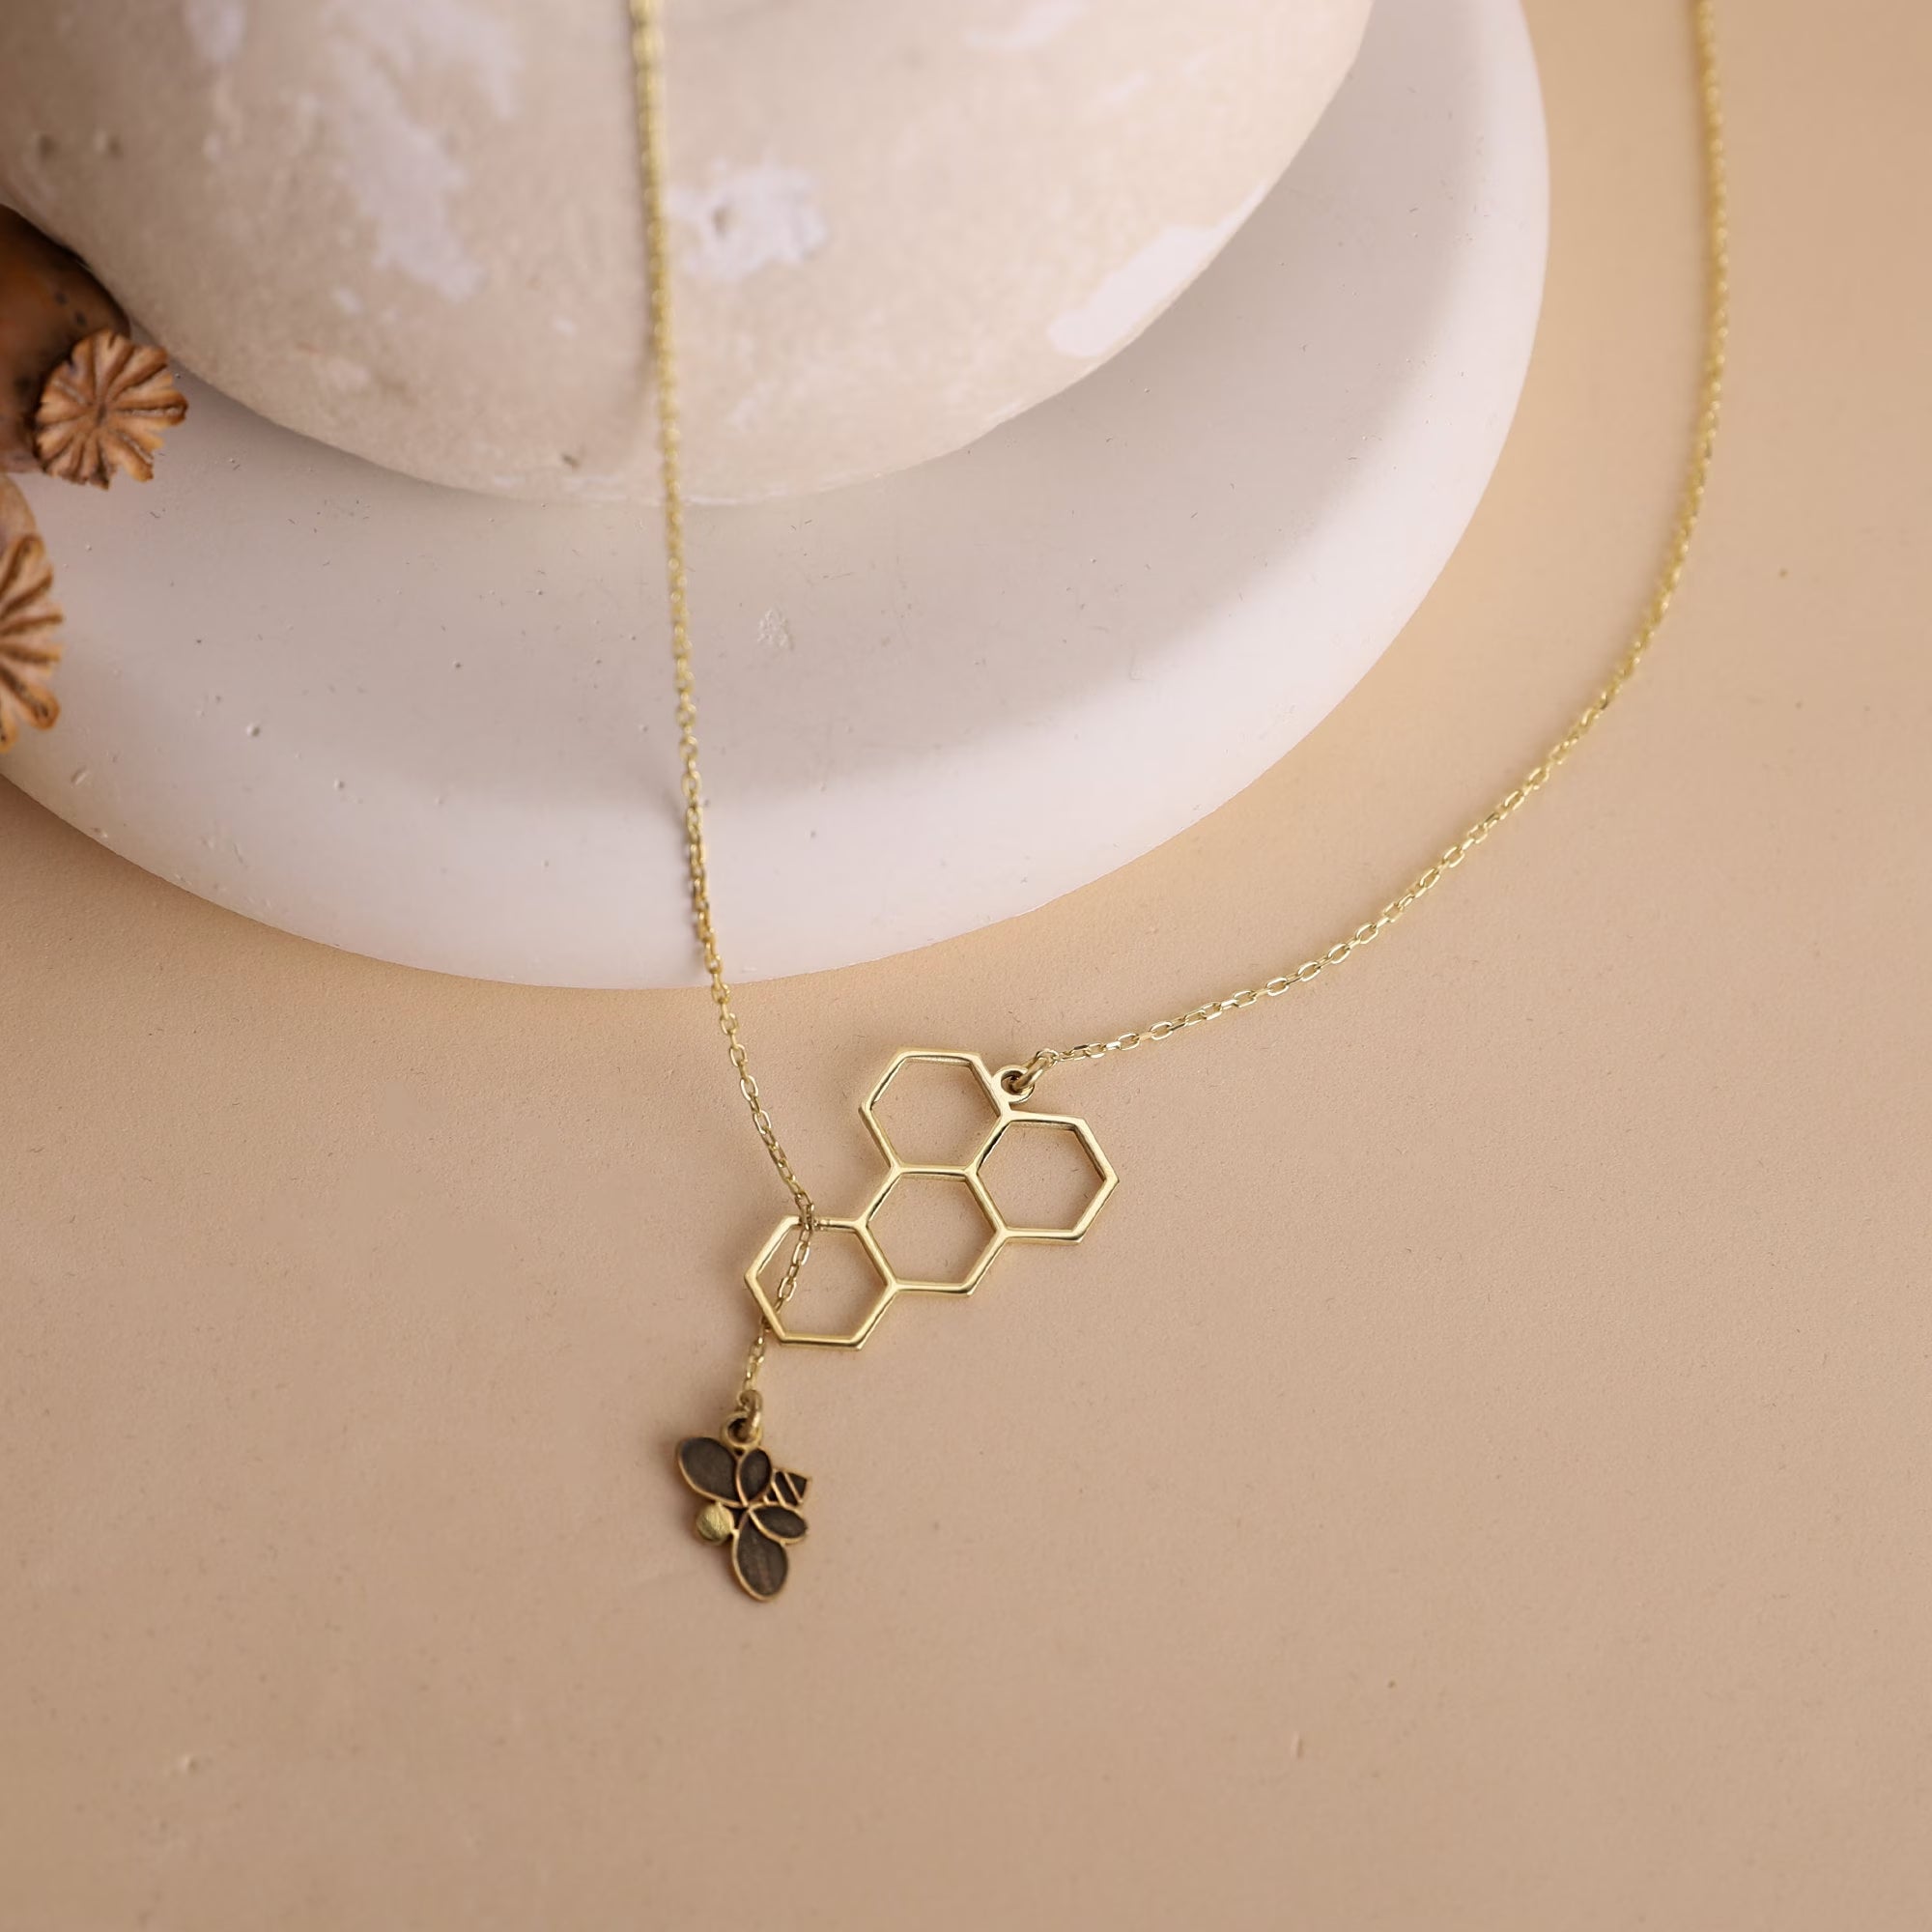 Honeycomb with Bumblebee Dainty Necklace | Minimalist Gold Honeycomb Necklace | Silver Bee Necklace | Gift for Women